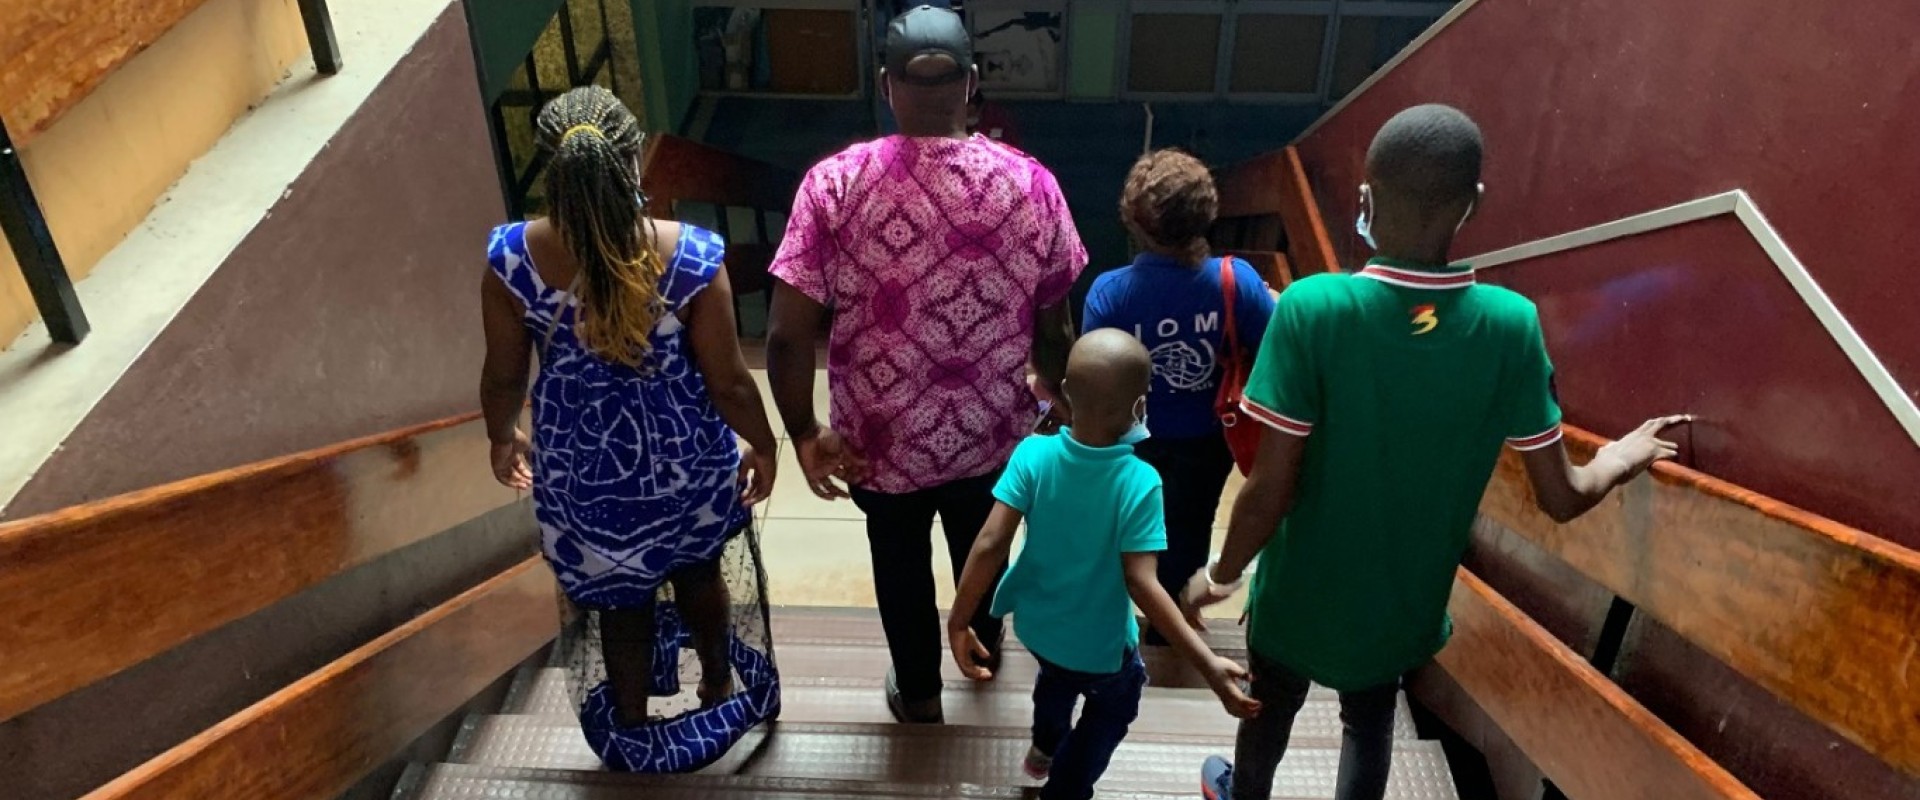 A reunified family returns to Cameroon thanks to IOM’s support. Photo: IOM 2022/Kim Winkler